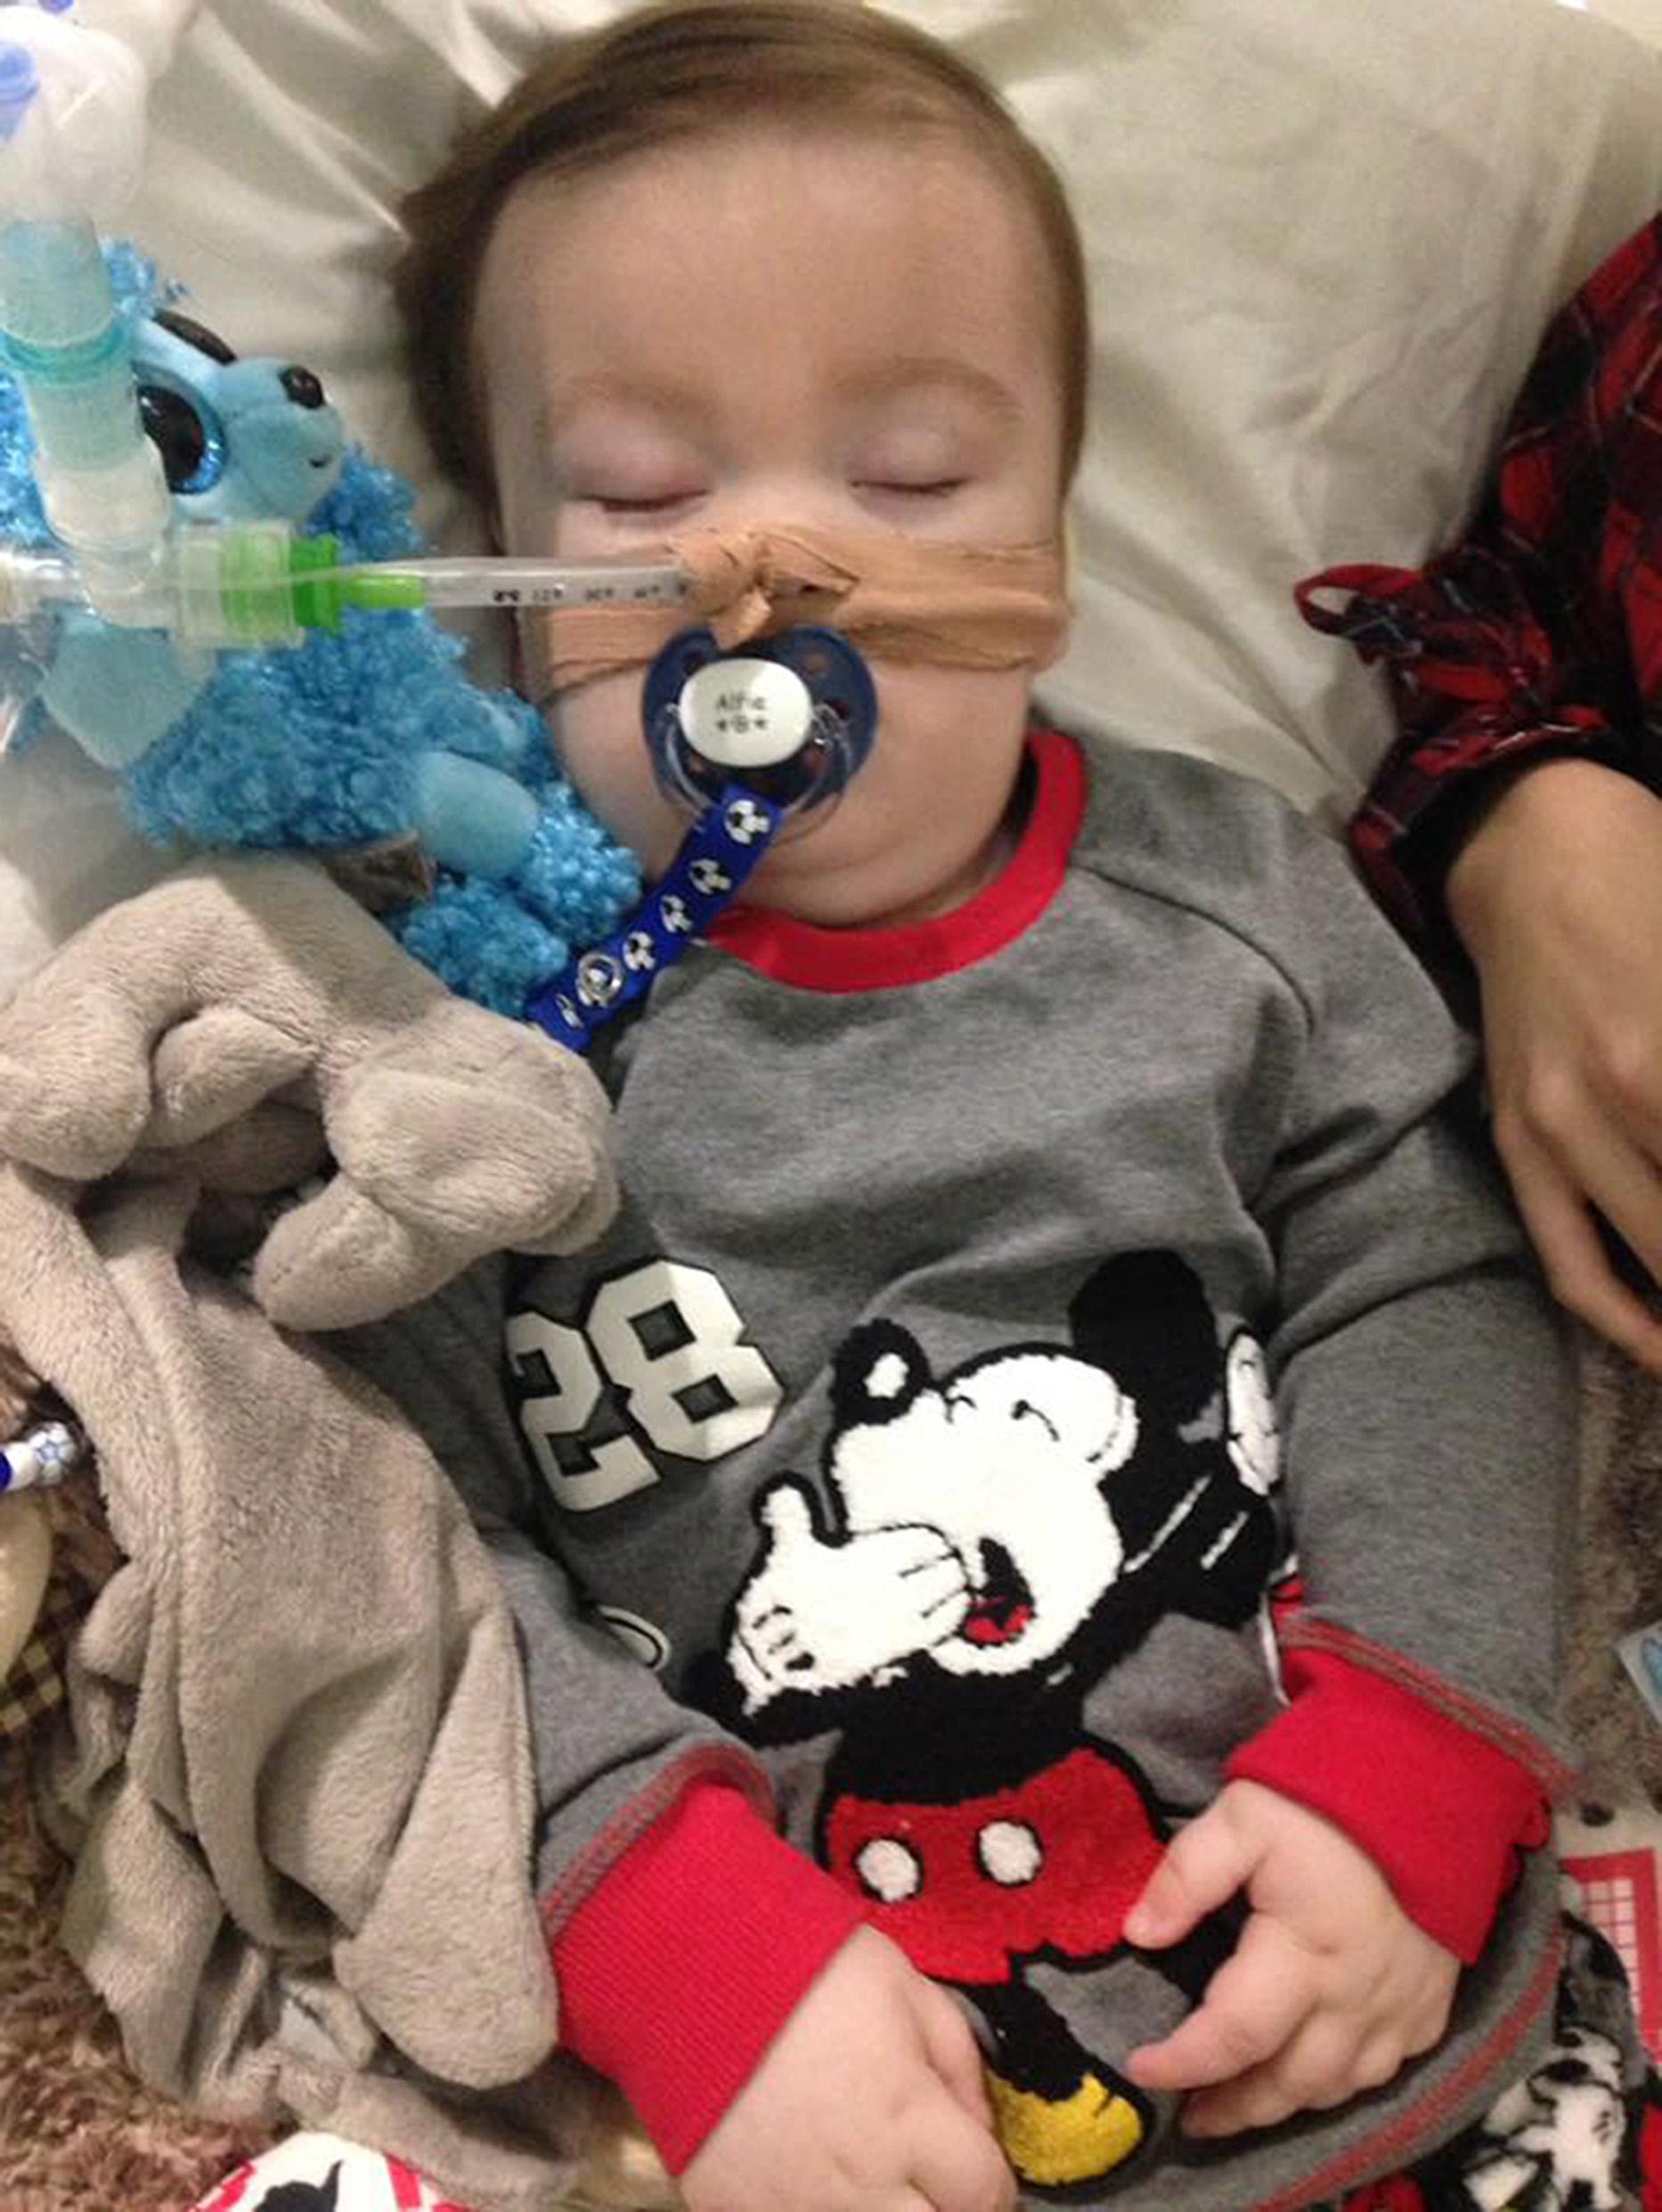 Judges have ruled Alfie Evans’ life support should be withdrawn